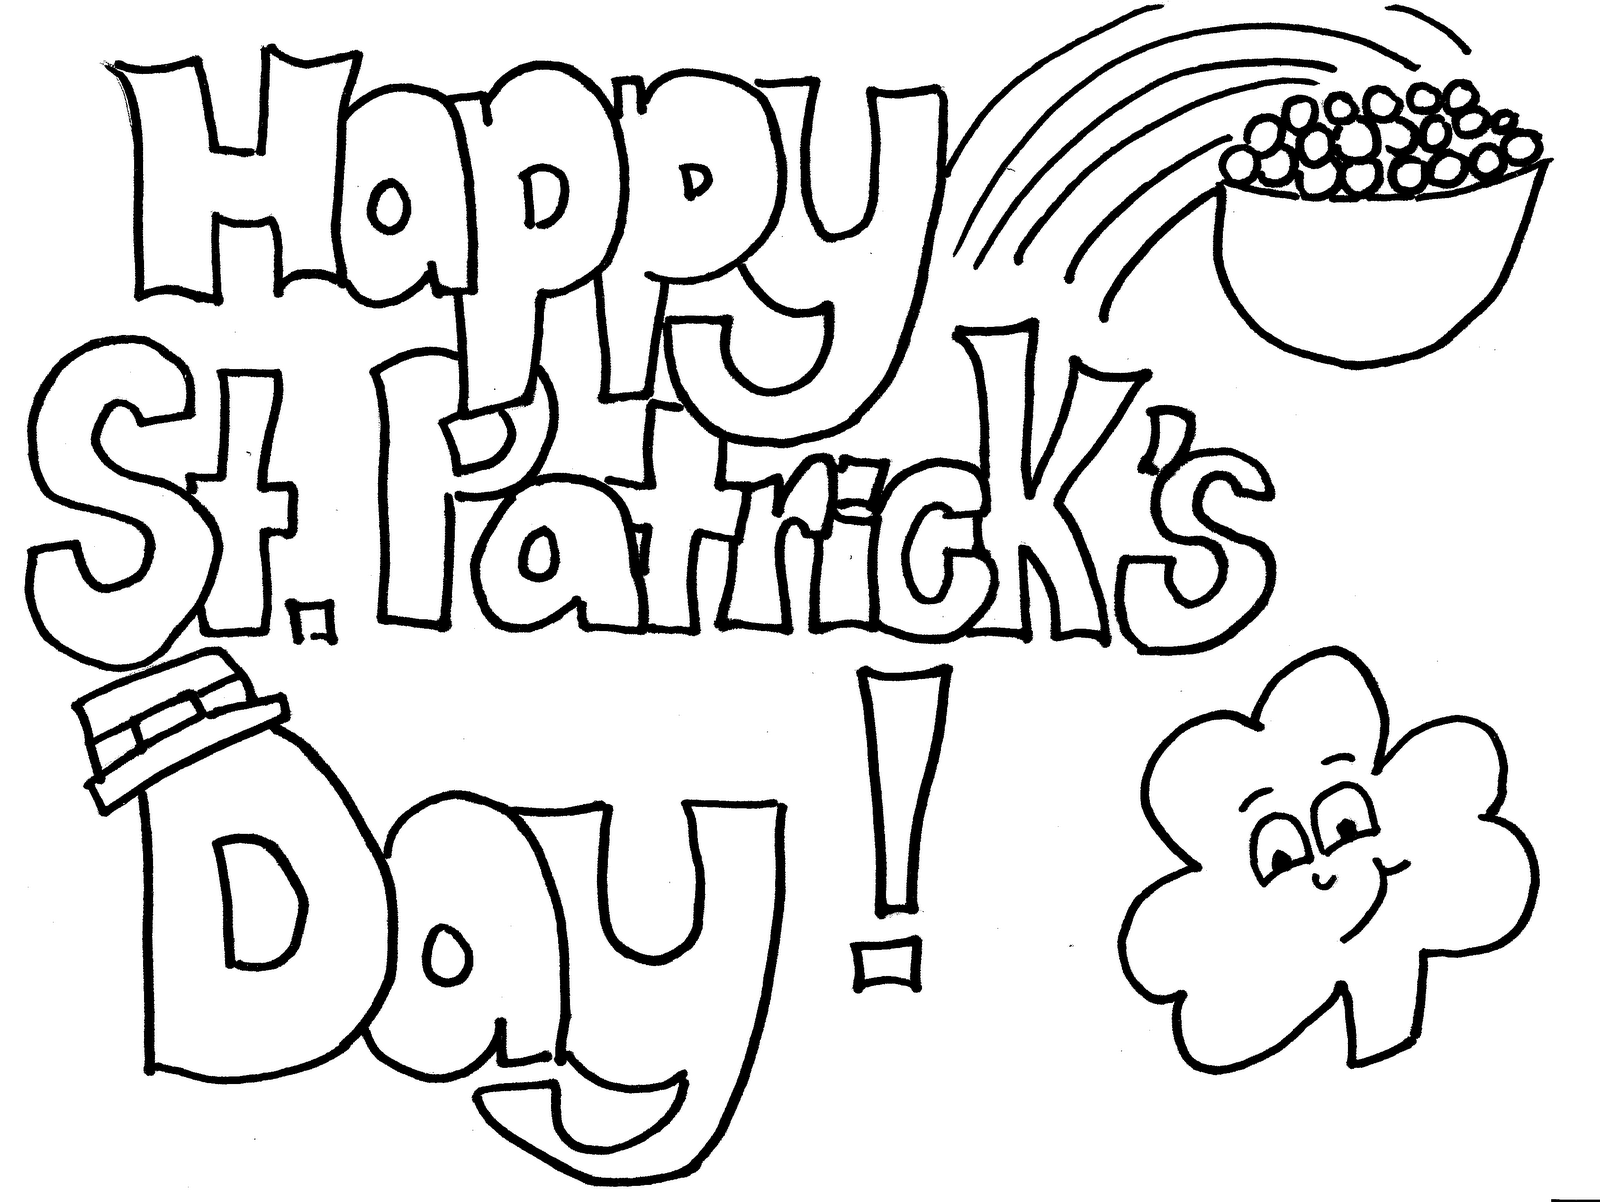 free coloring pages st patricks day